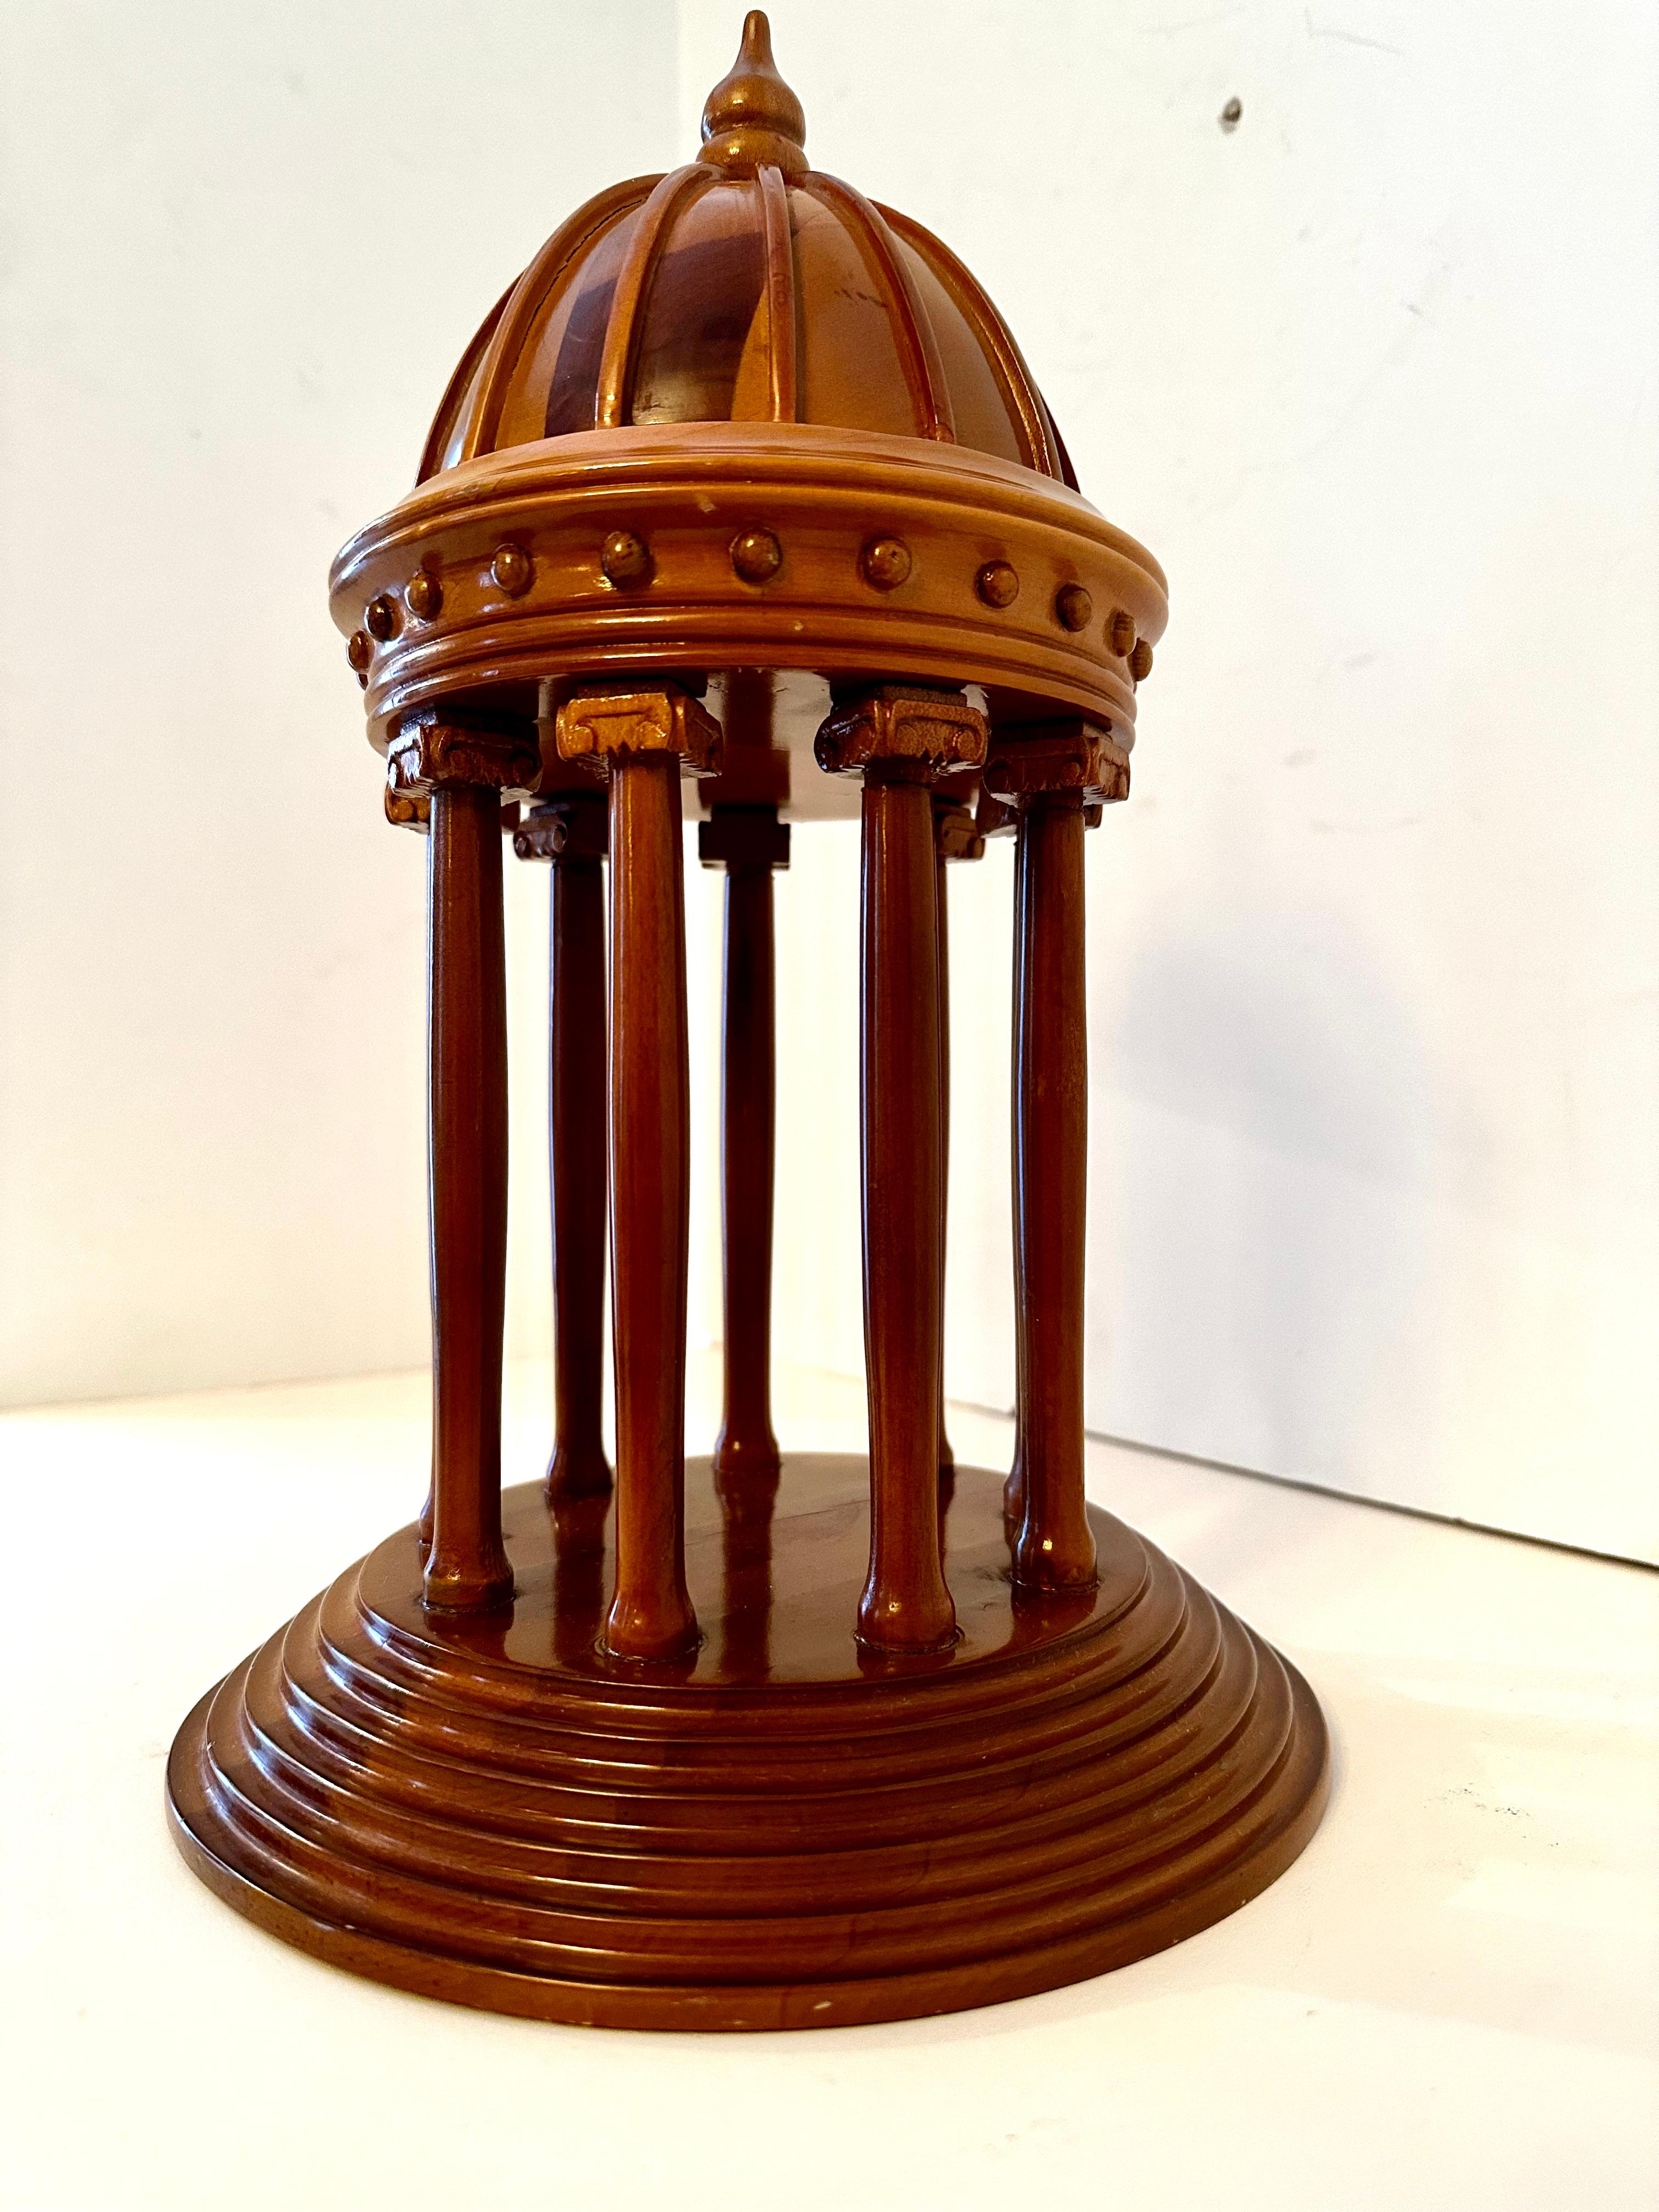 Hand-Crafted Wooden Domed Architectural Model